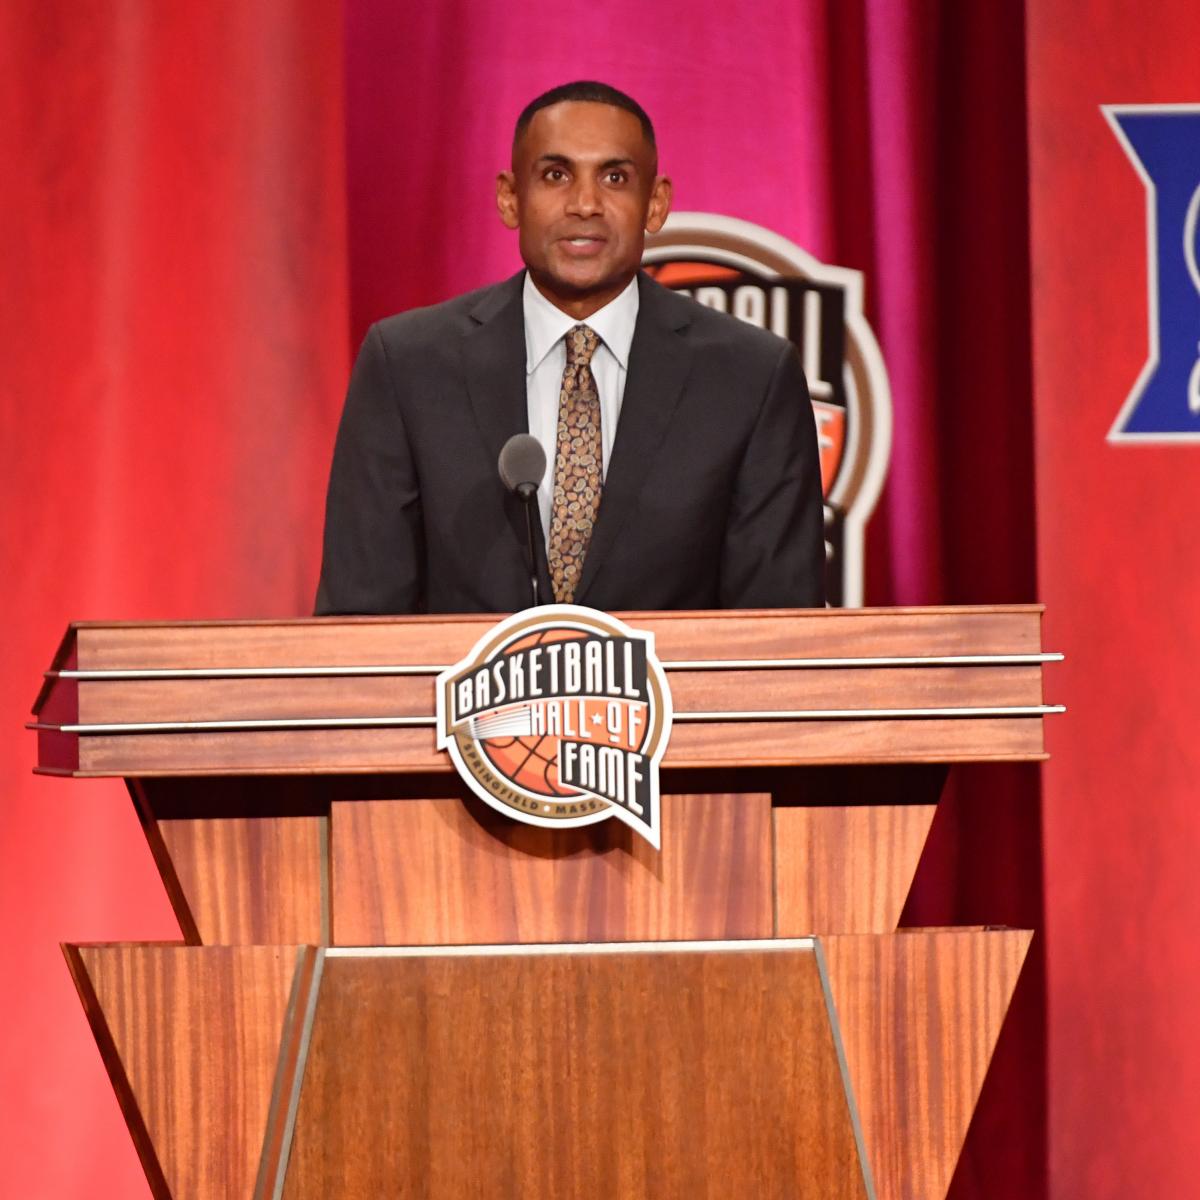 Basketball Hall of Fame 2018: Ceremony Recap, Speech Highlights and